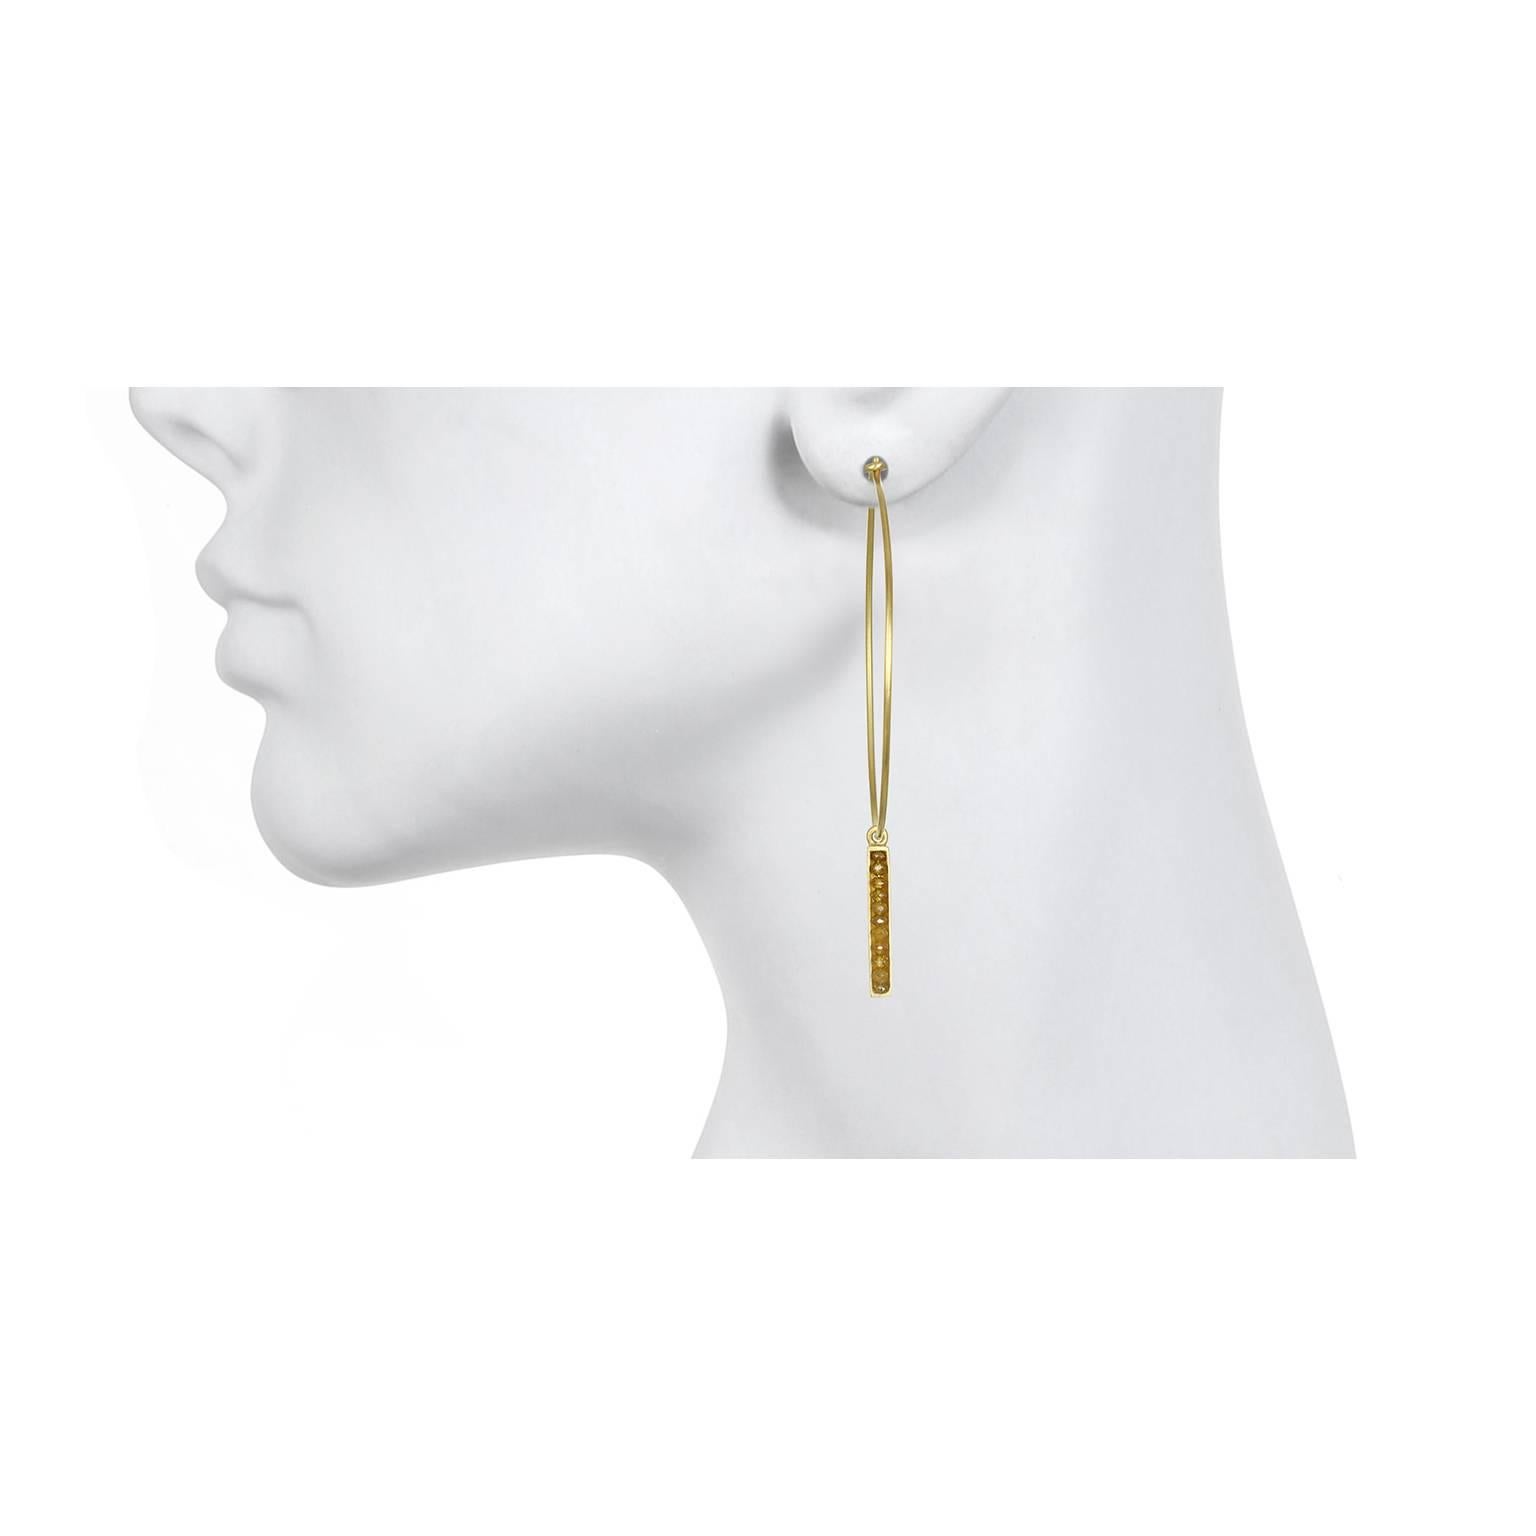 Slick and linear are the thoughts that come to mind when sporting these elegant 18k gold and diamond bar drops.  The taupe, olive green hues are neutral yet sparkly.  To be worn with our favorite 18k gold wire hoops (sold separately).  Perfect to